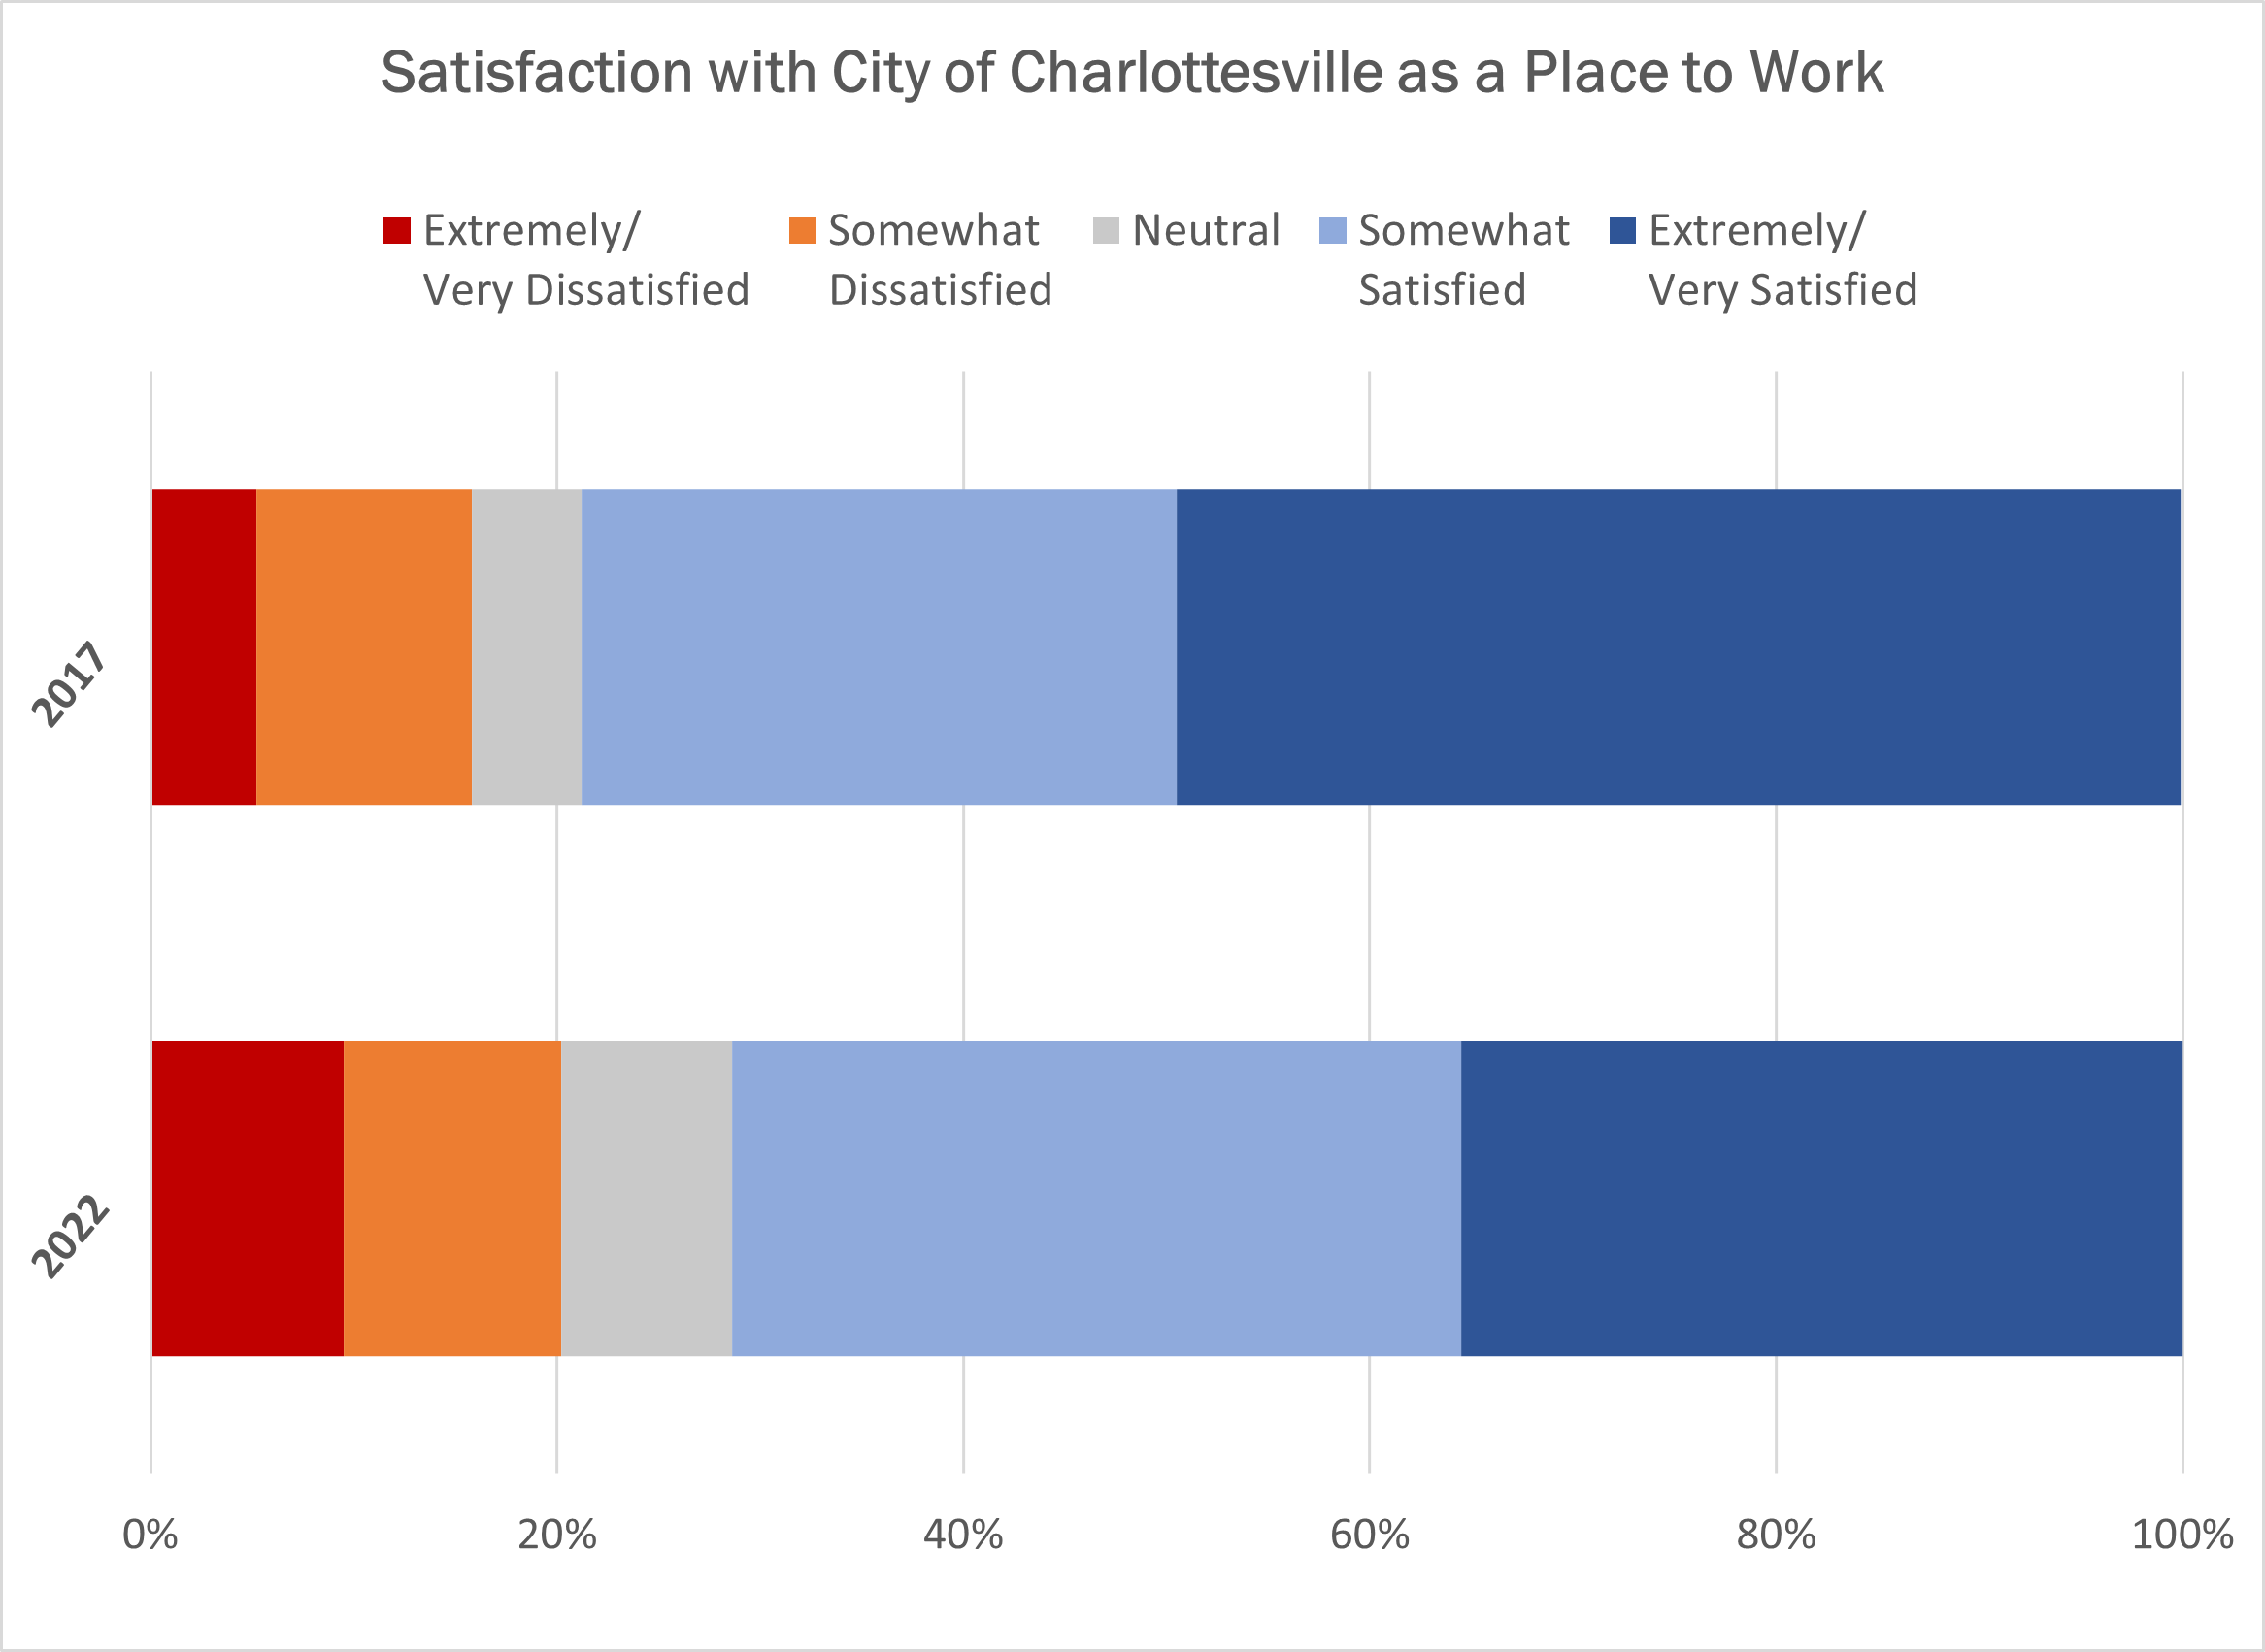 bar chart showing employees' overall satisfaction with Charlottesville as a place to work